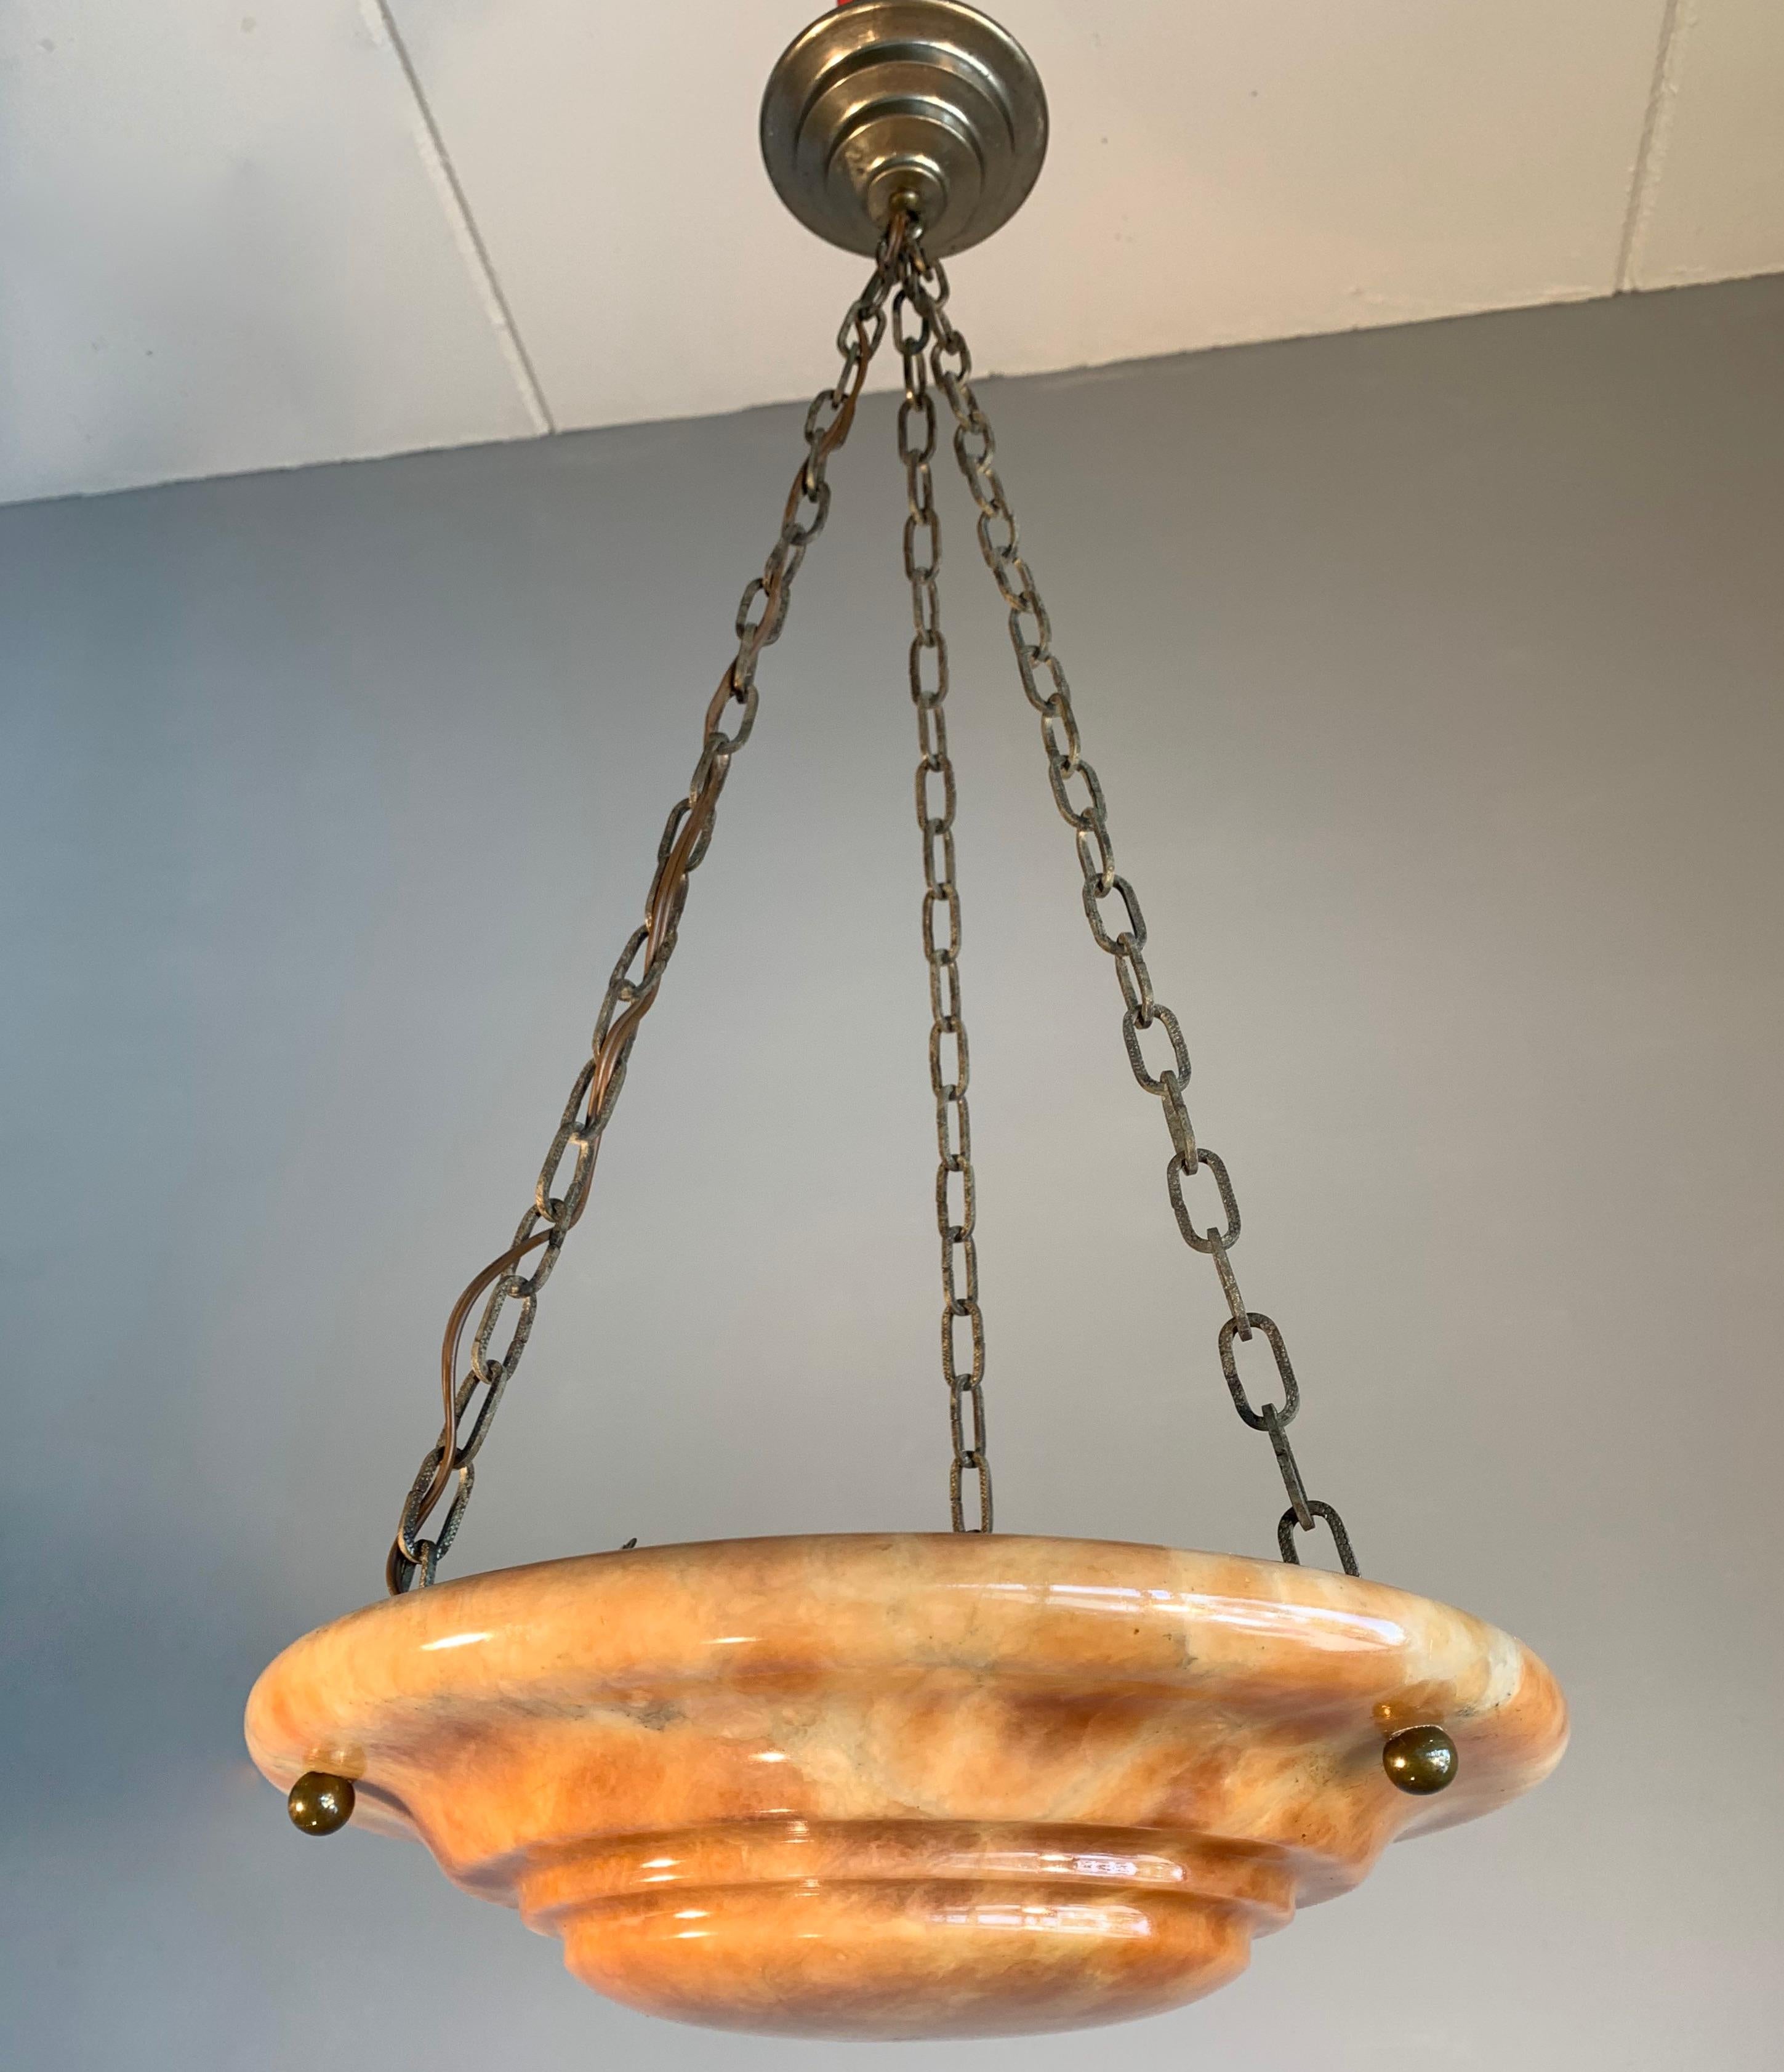 Striking antique light fixture for an entry hall, bedroom or any other small room.

With early 20th century light fixtures being one of our specialties, we always love finding timeless pendants and flushmounts we have never seen before. This